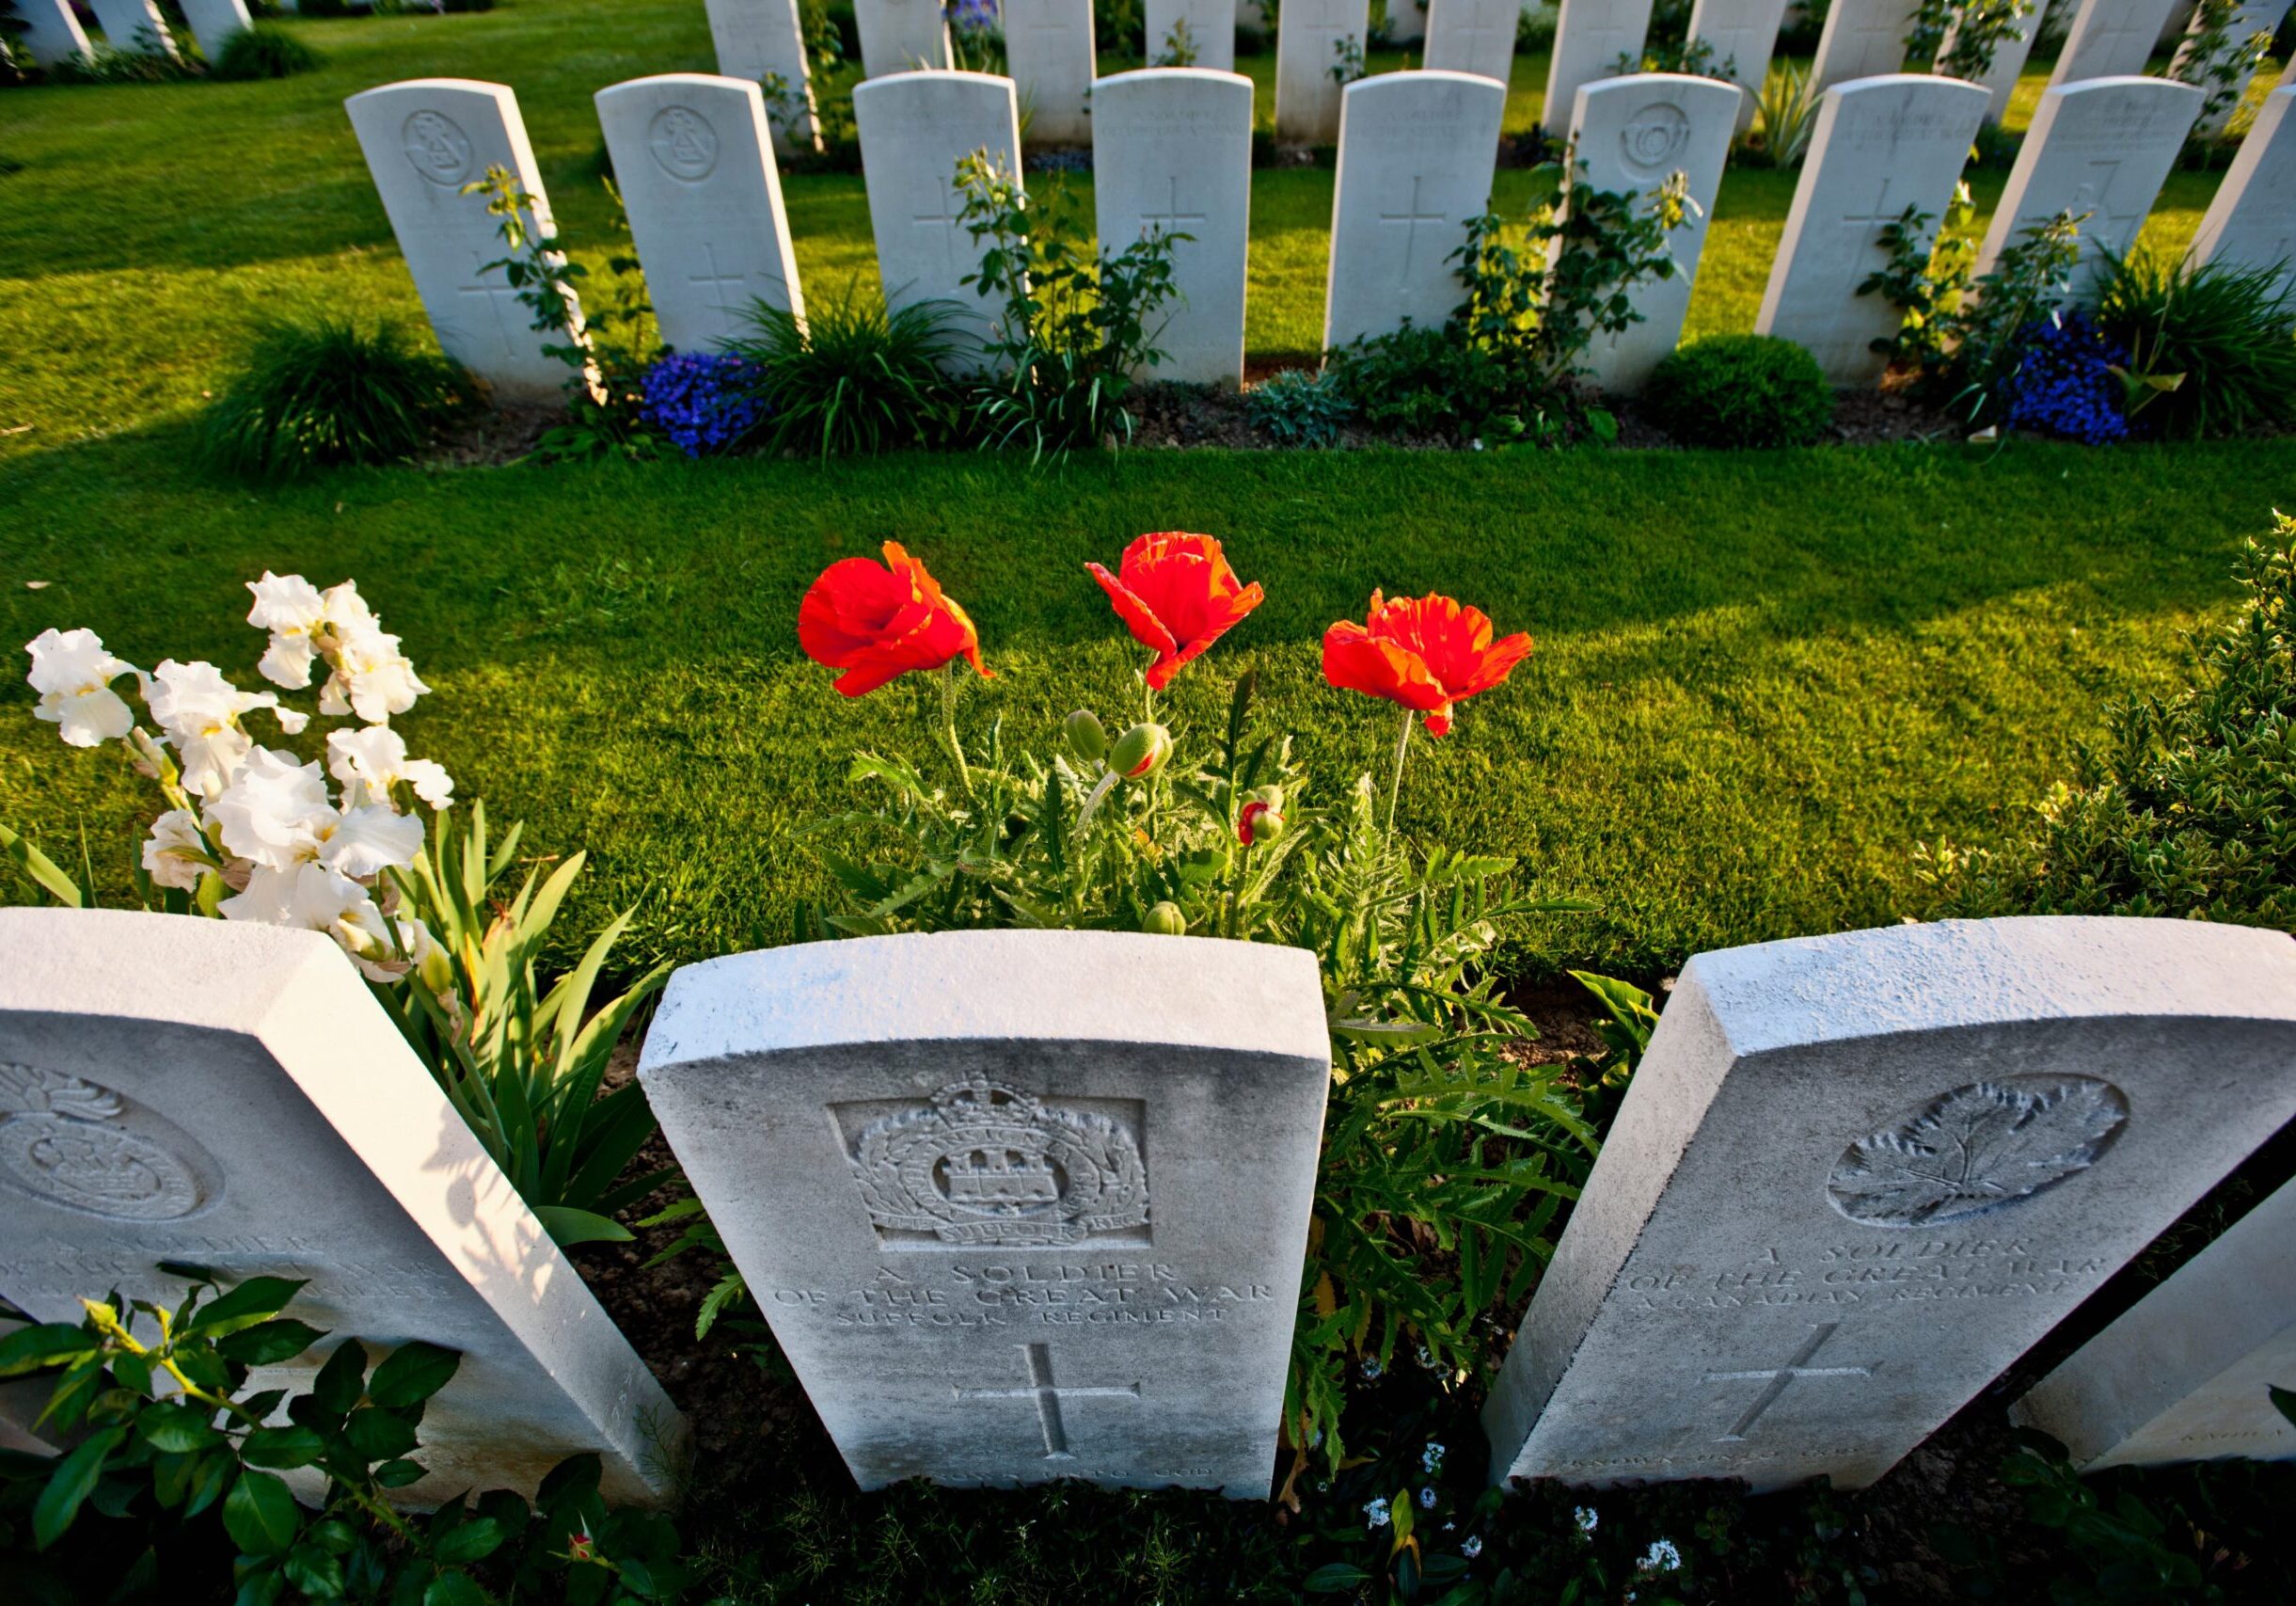 close-up-of-flowers-growing-on-graves-2022-03-08-00-28-37-utc (2)